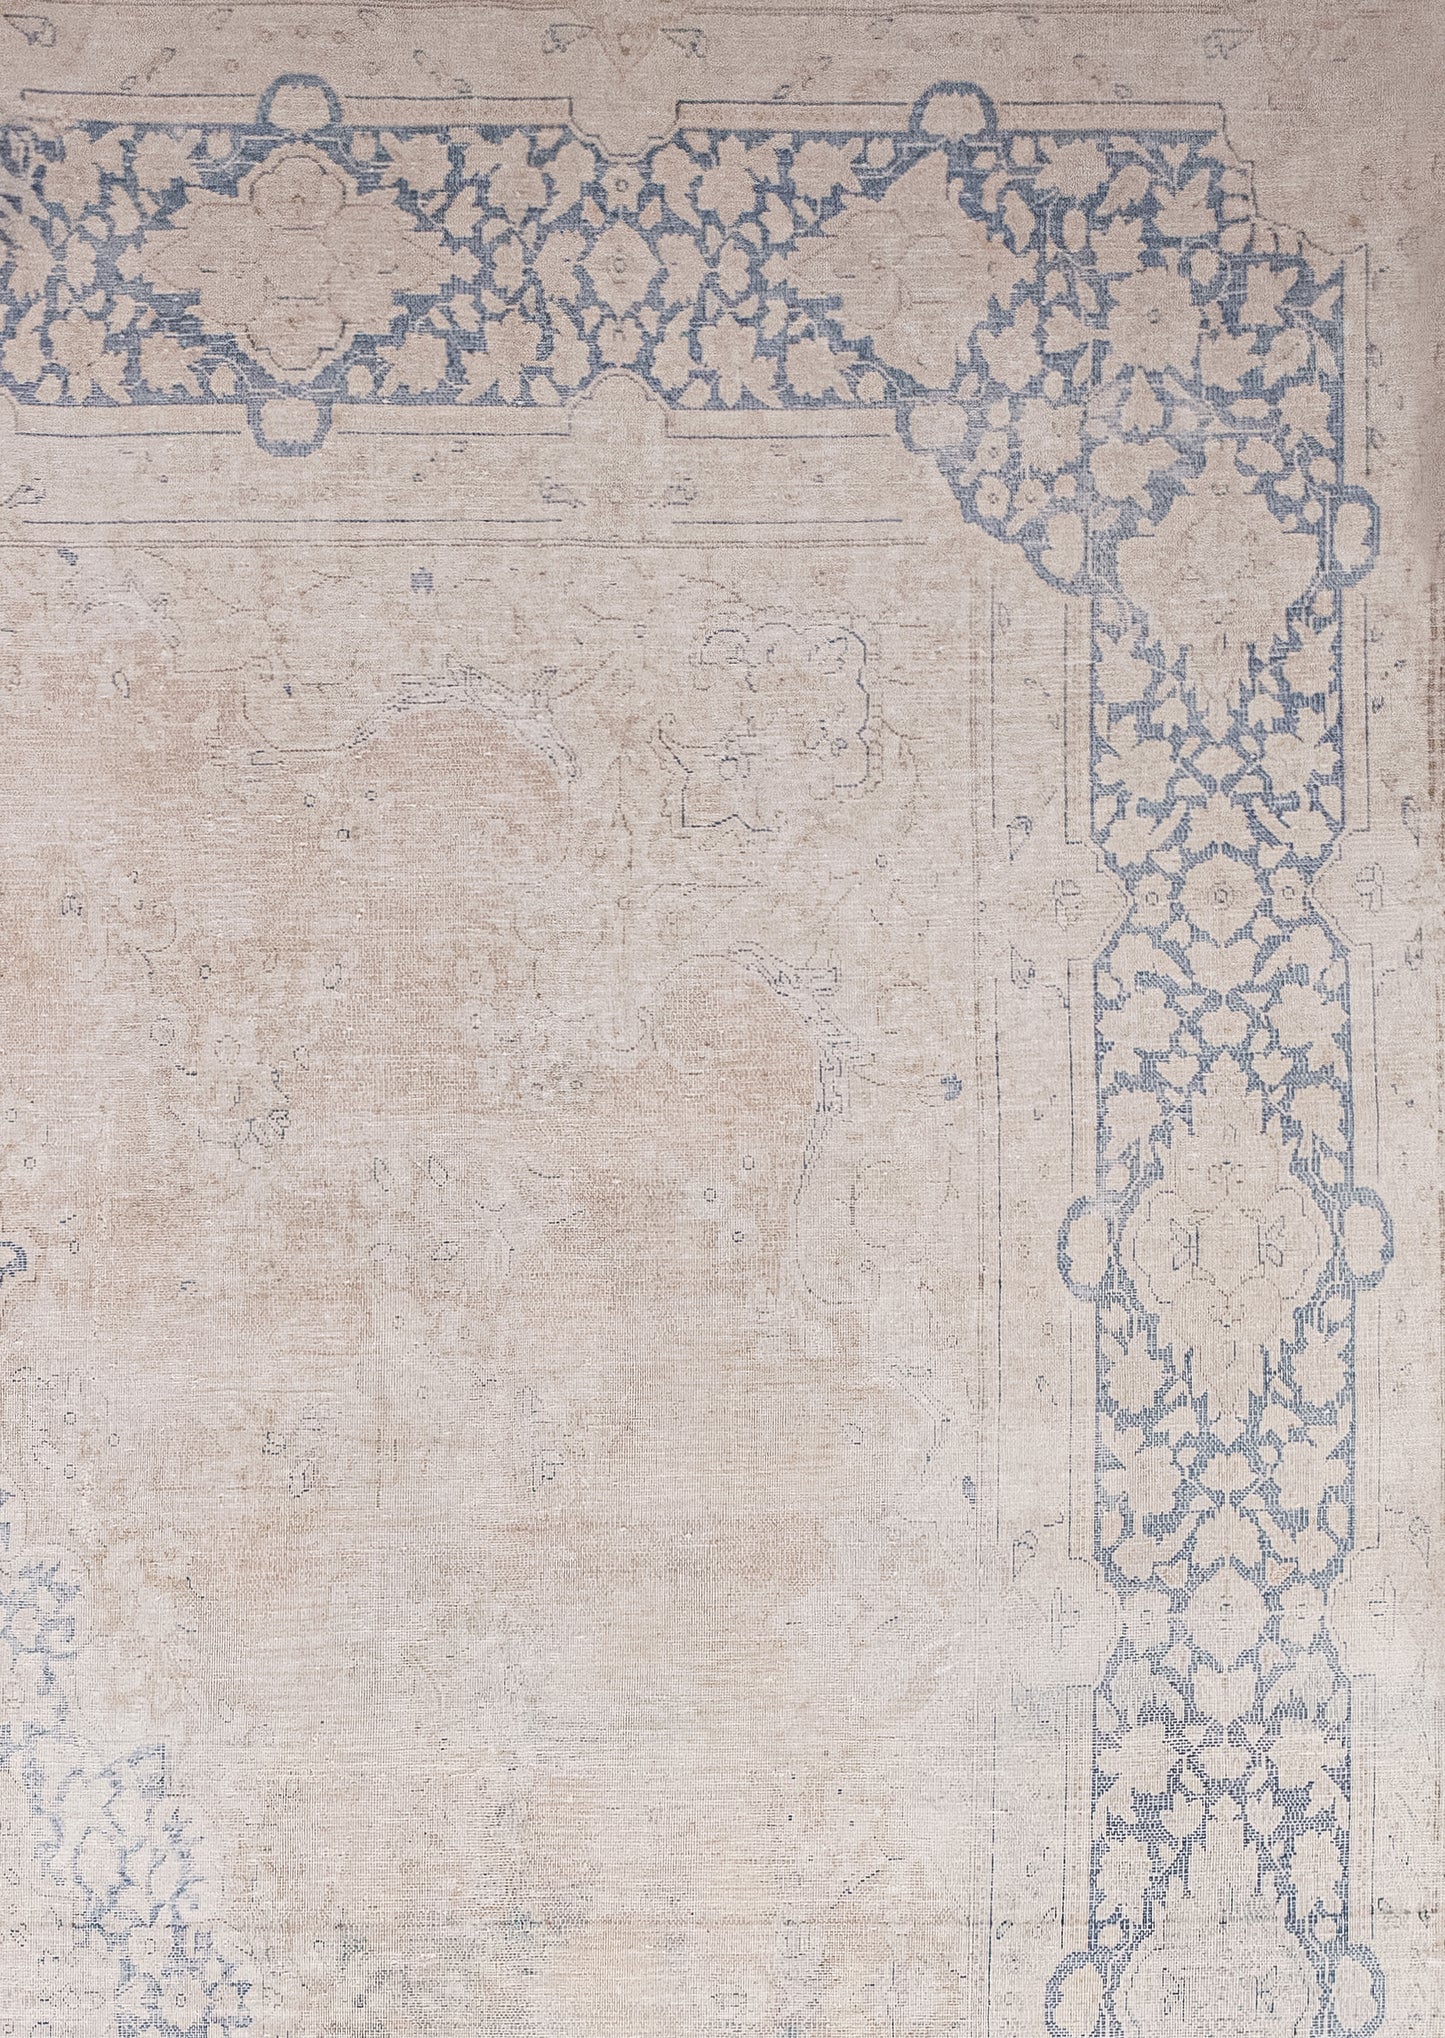 The outer margin has two ornamental borders that frame a thick blue one filled with a paisley floral print in beige.